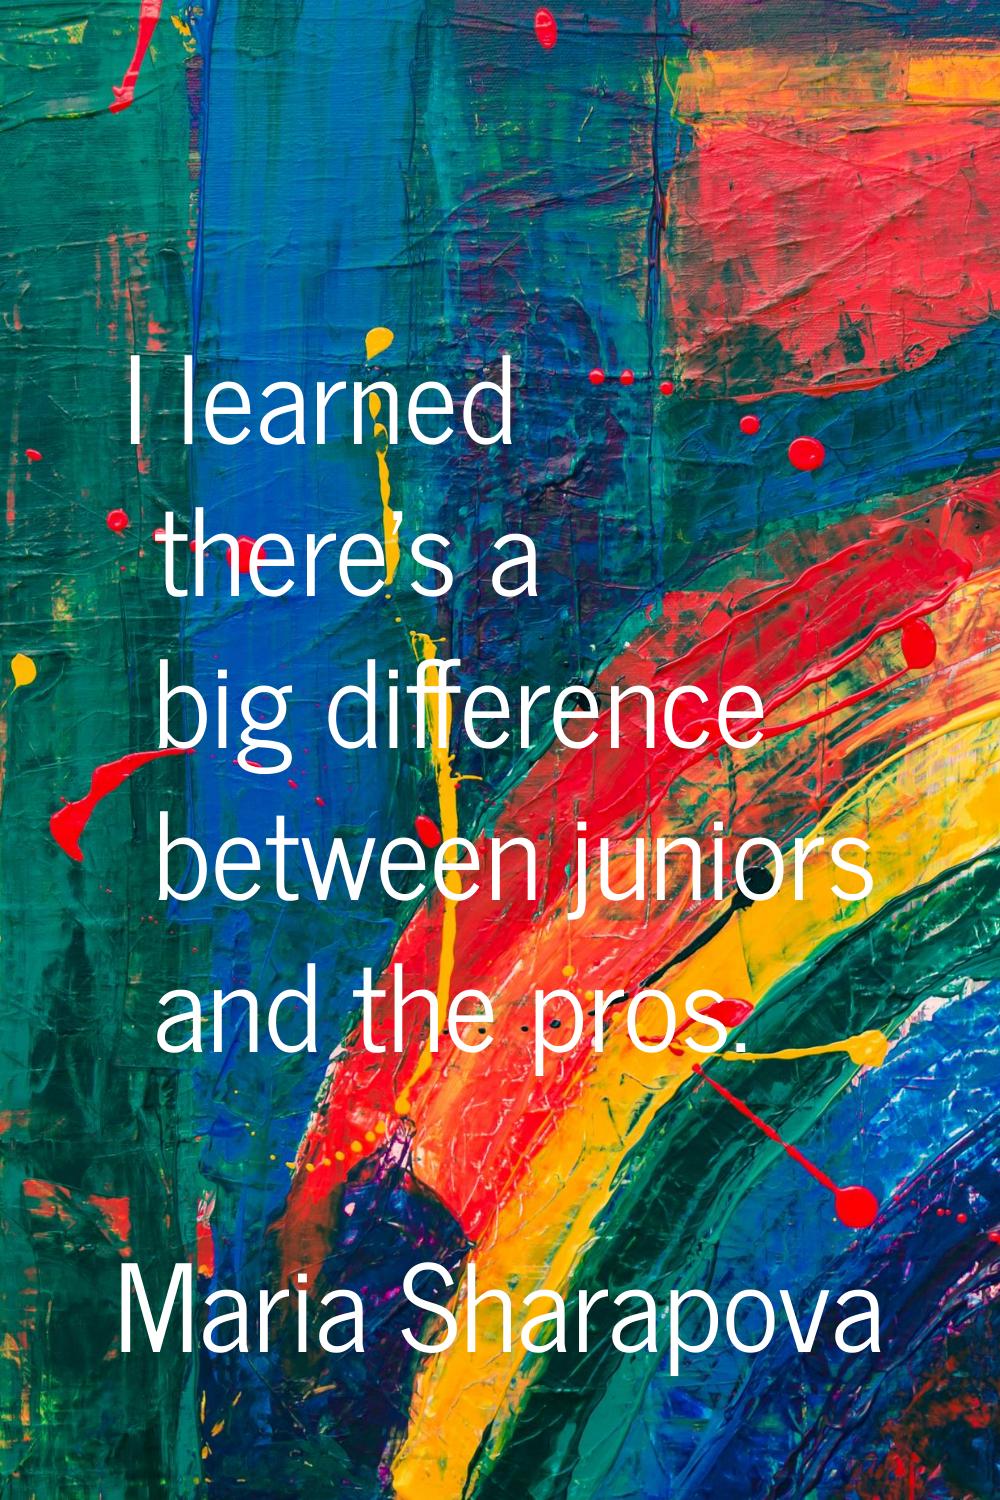 I learned there's a big difference between juniors and the pros.